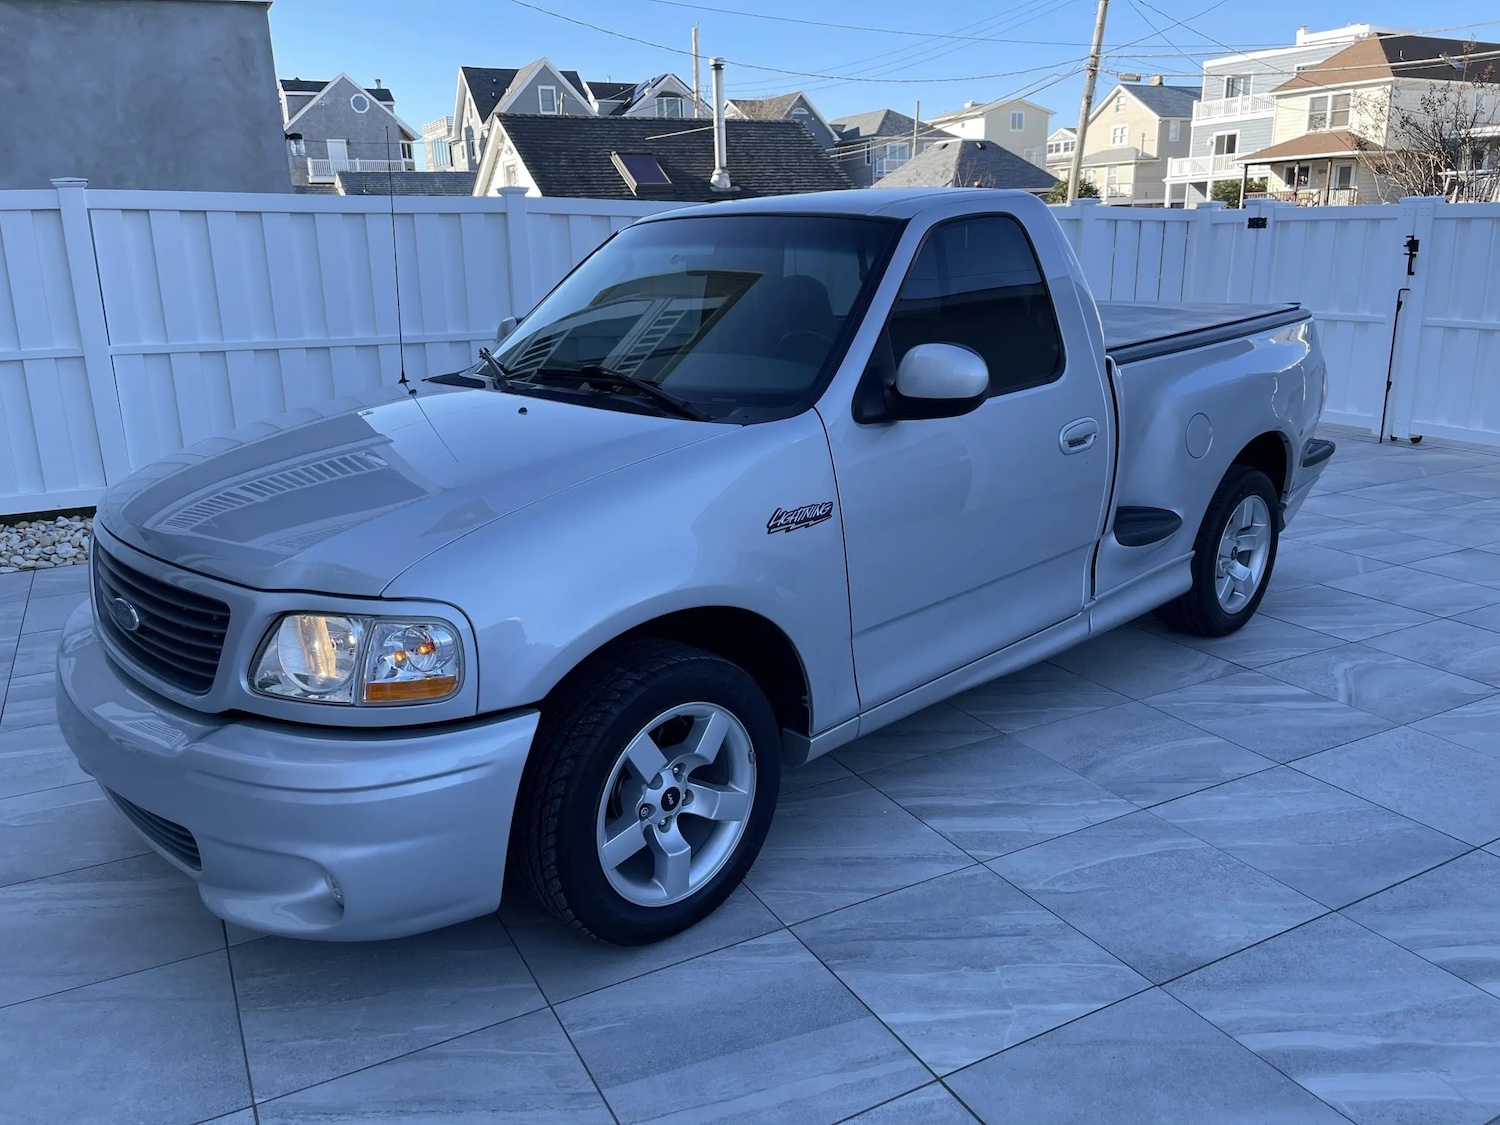 2002 Ford F-150 SVT Lightning With Just 4K Miles Up For Auction